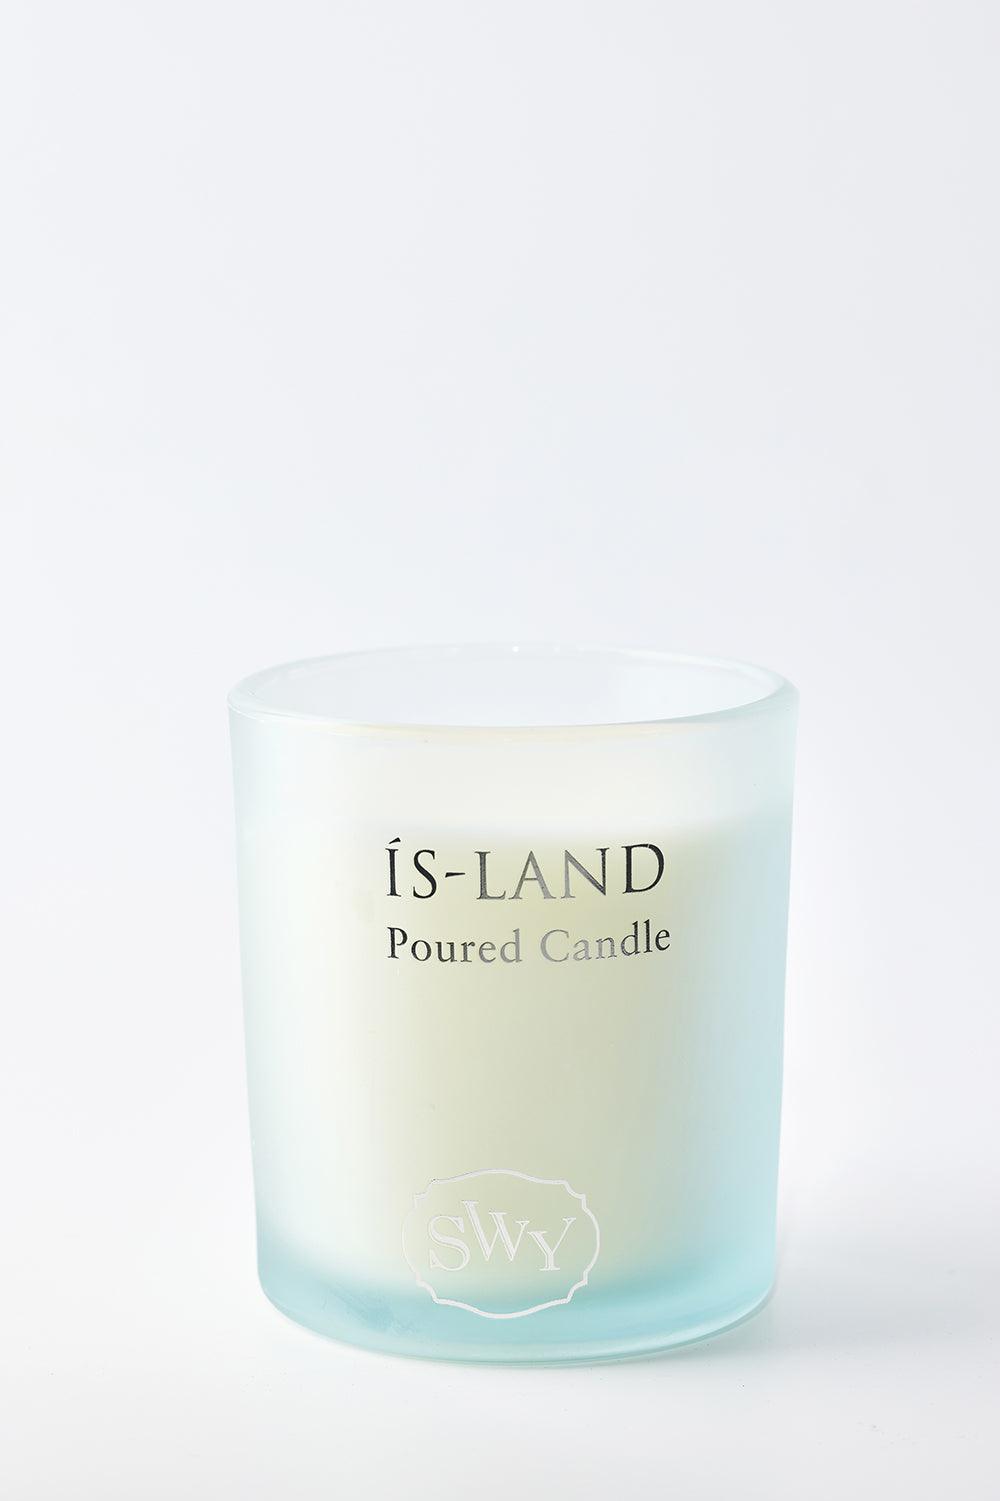 Poured Candle – Is-land - SWY - Scent With You